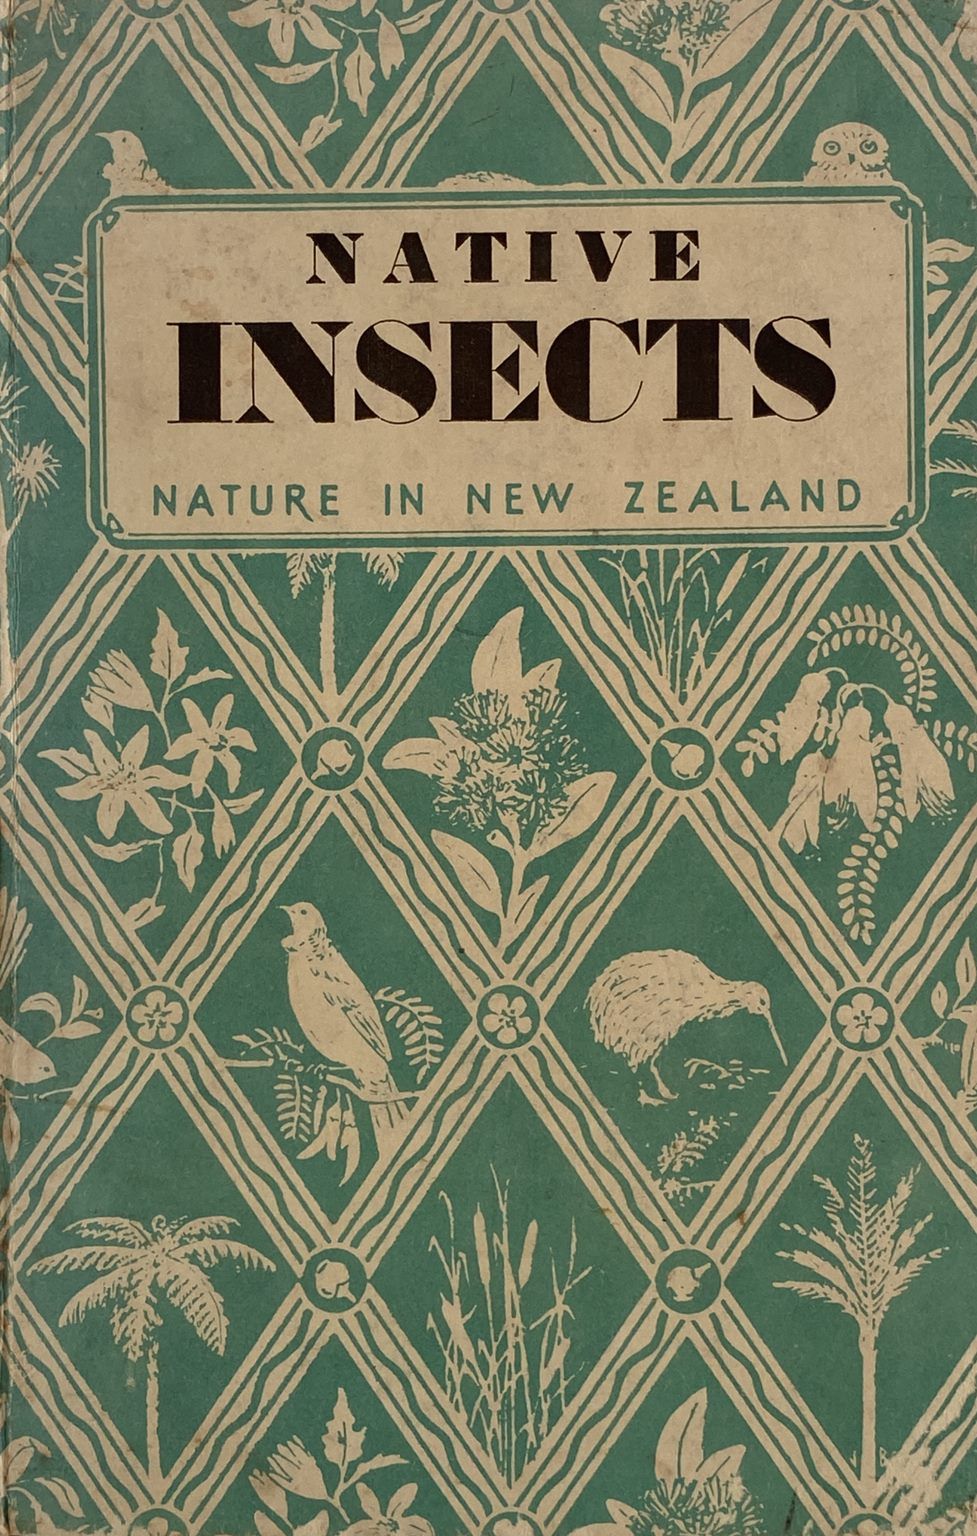 NATIVE INSECTS